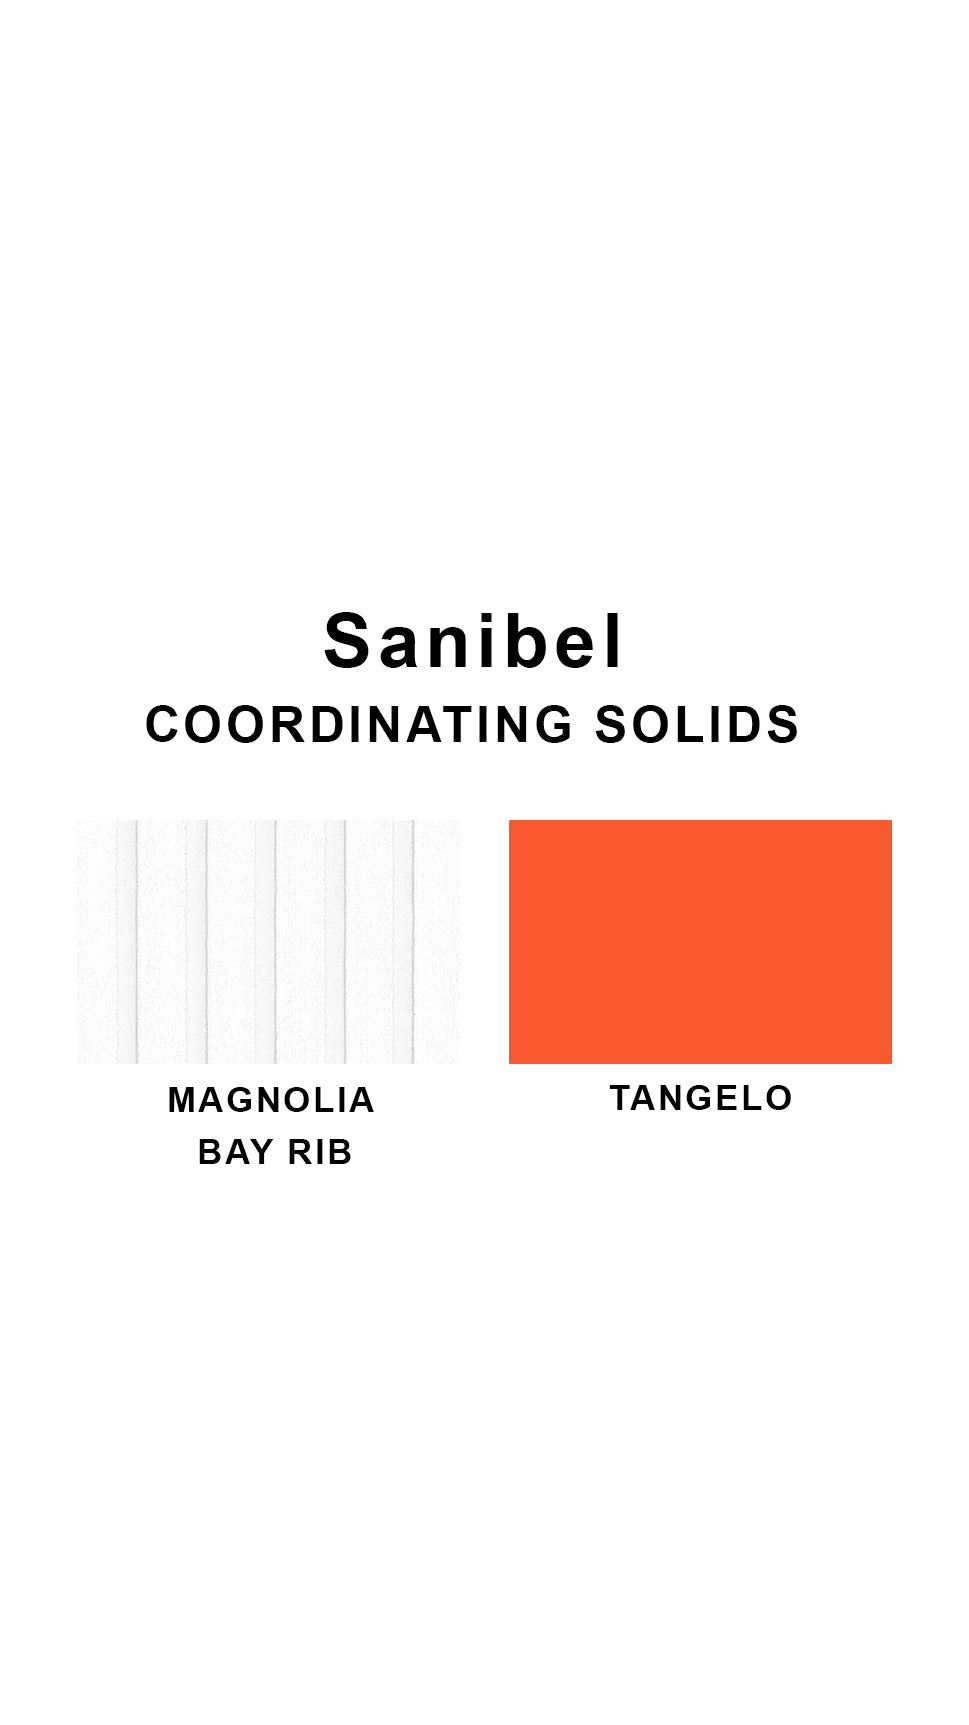 Coordinating solids chart for Sanibel swimsuit print: Magnolia Bay Rib and Tangelo